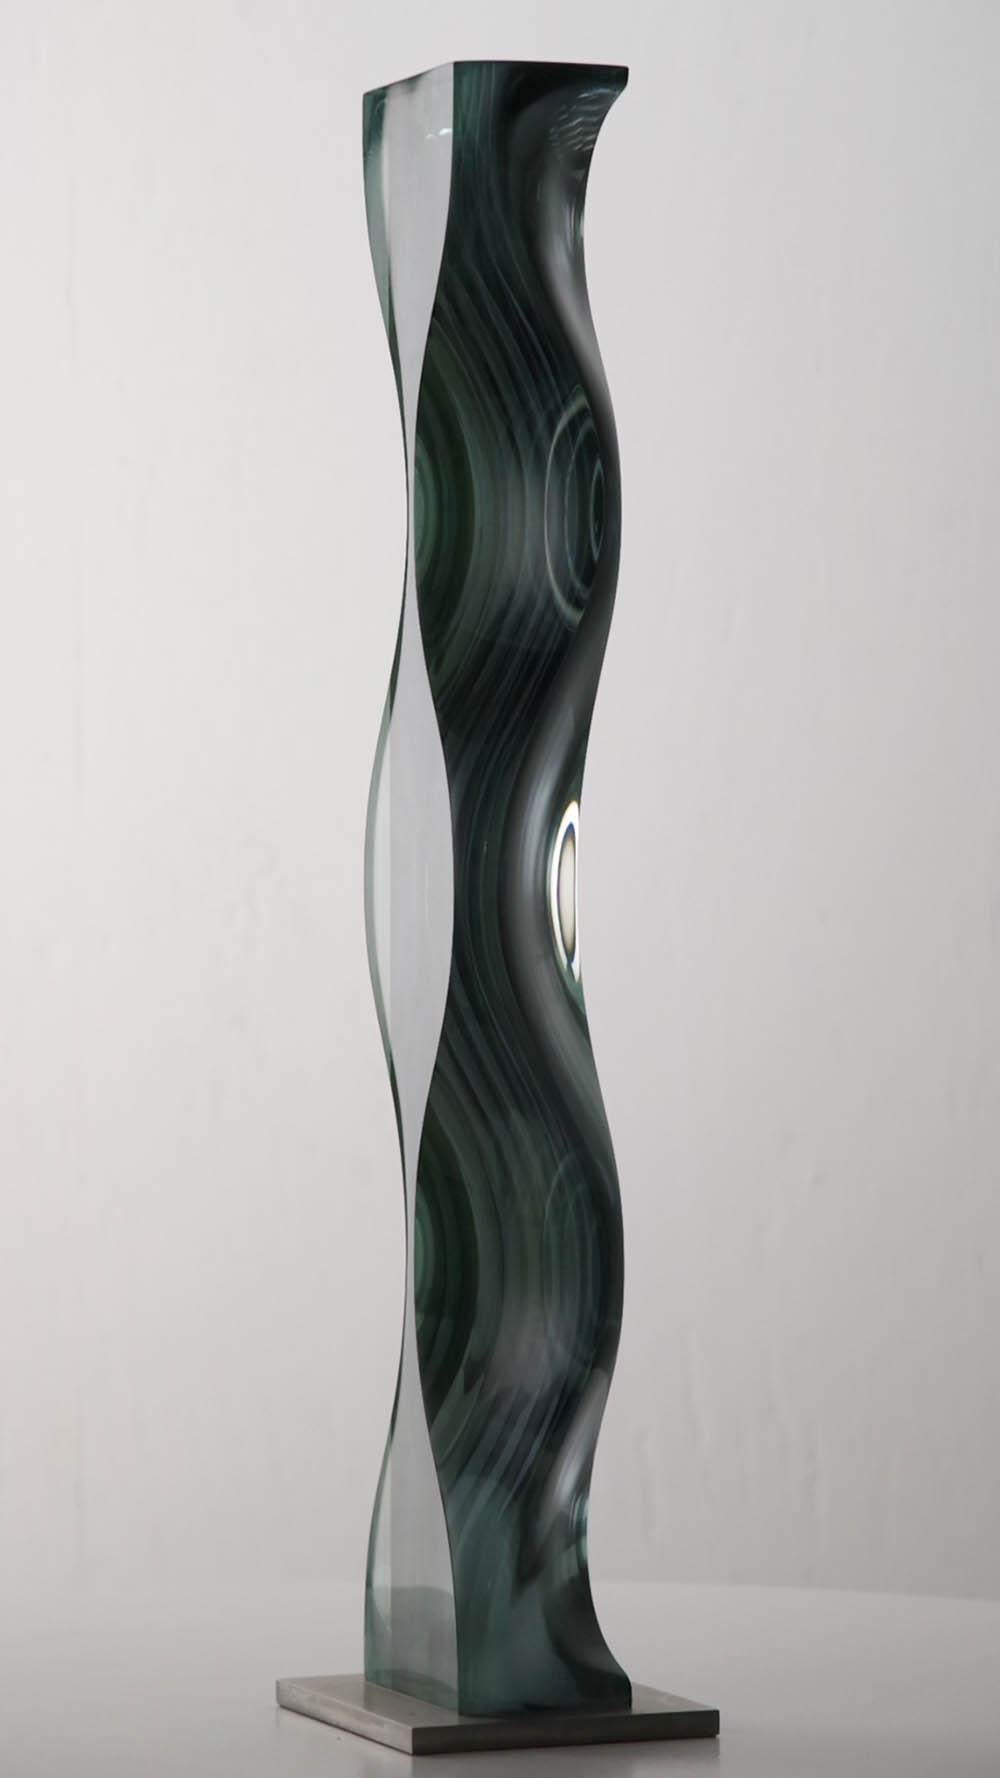 M.180603 by Toshio Iezumi - Contemporary glass sculpture, green, abstract For Sale 3